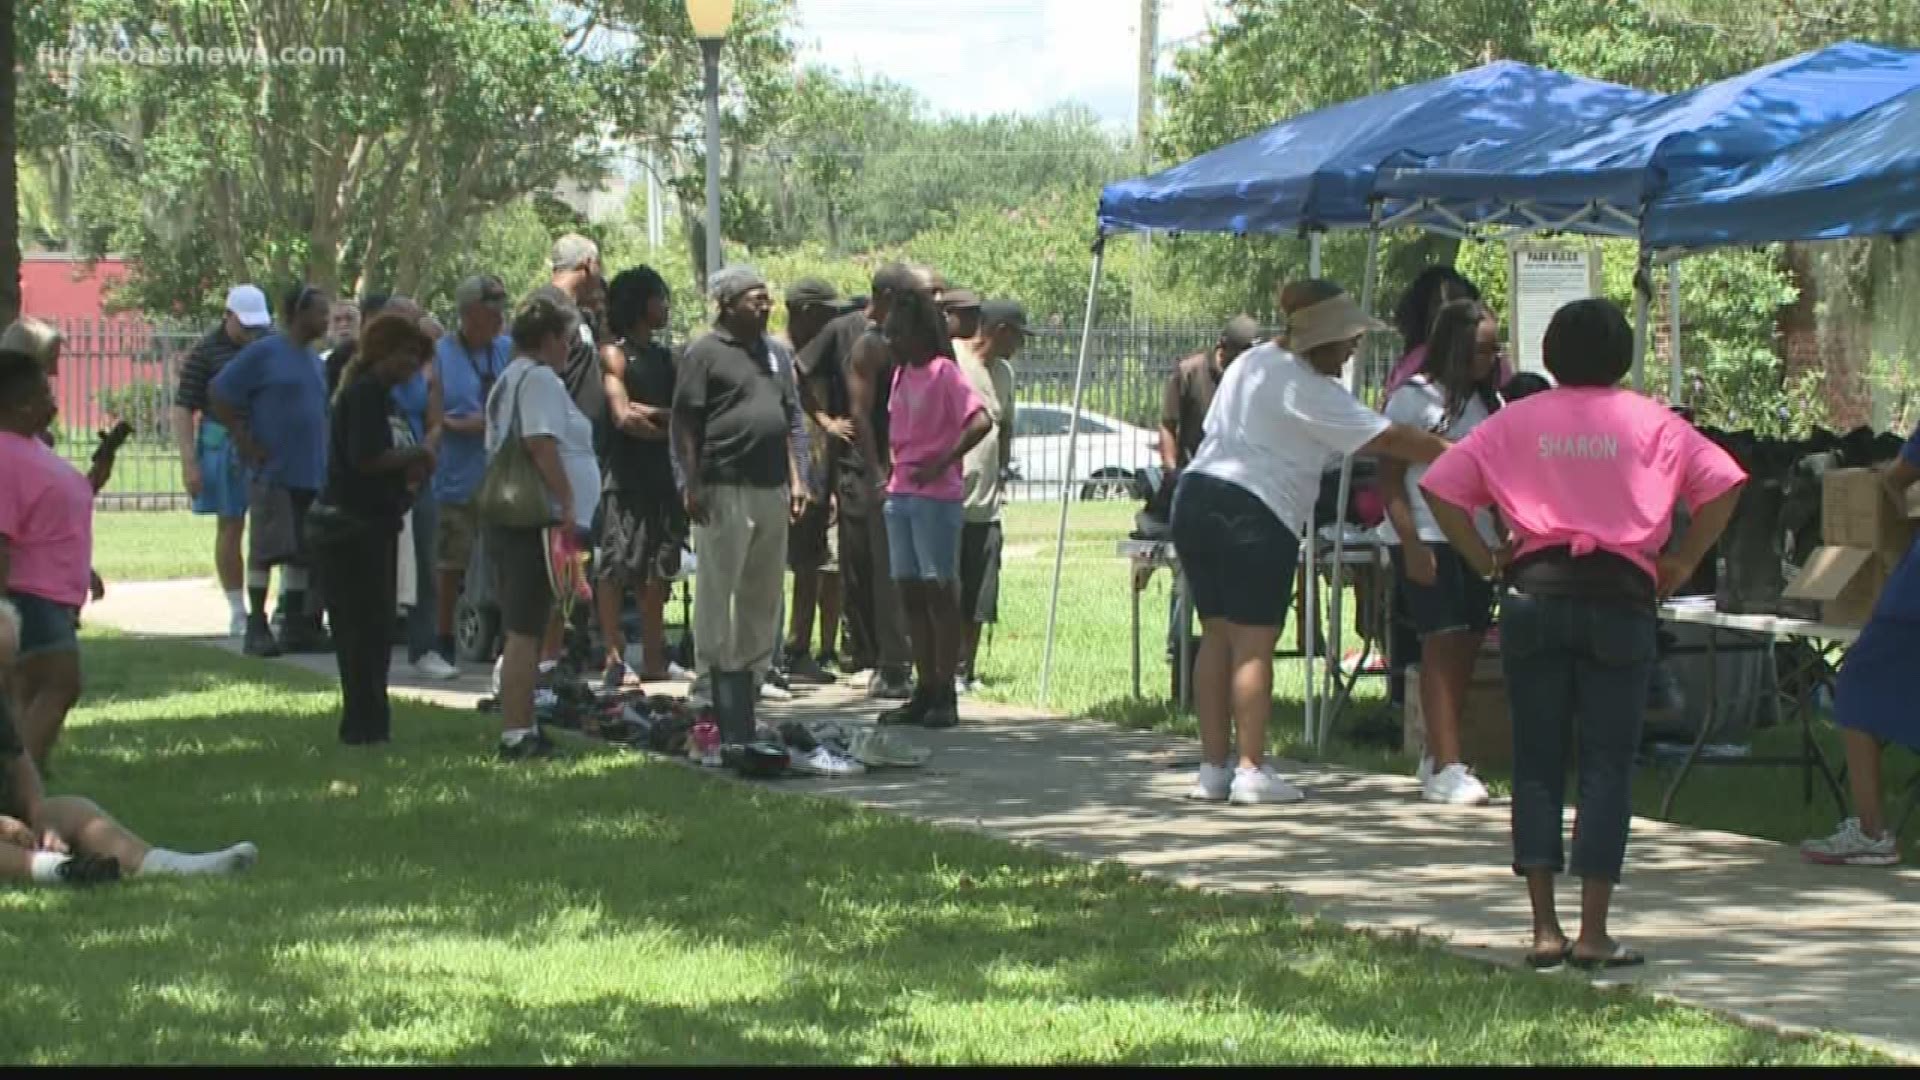 Madison Kirksey has spent four years devoting her time to her group #GetBackUpAgain. It had its first-ever cookout for homeless and underserved people Sunday.